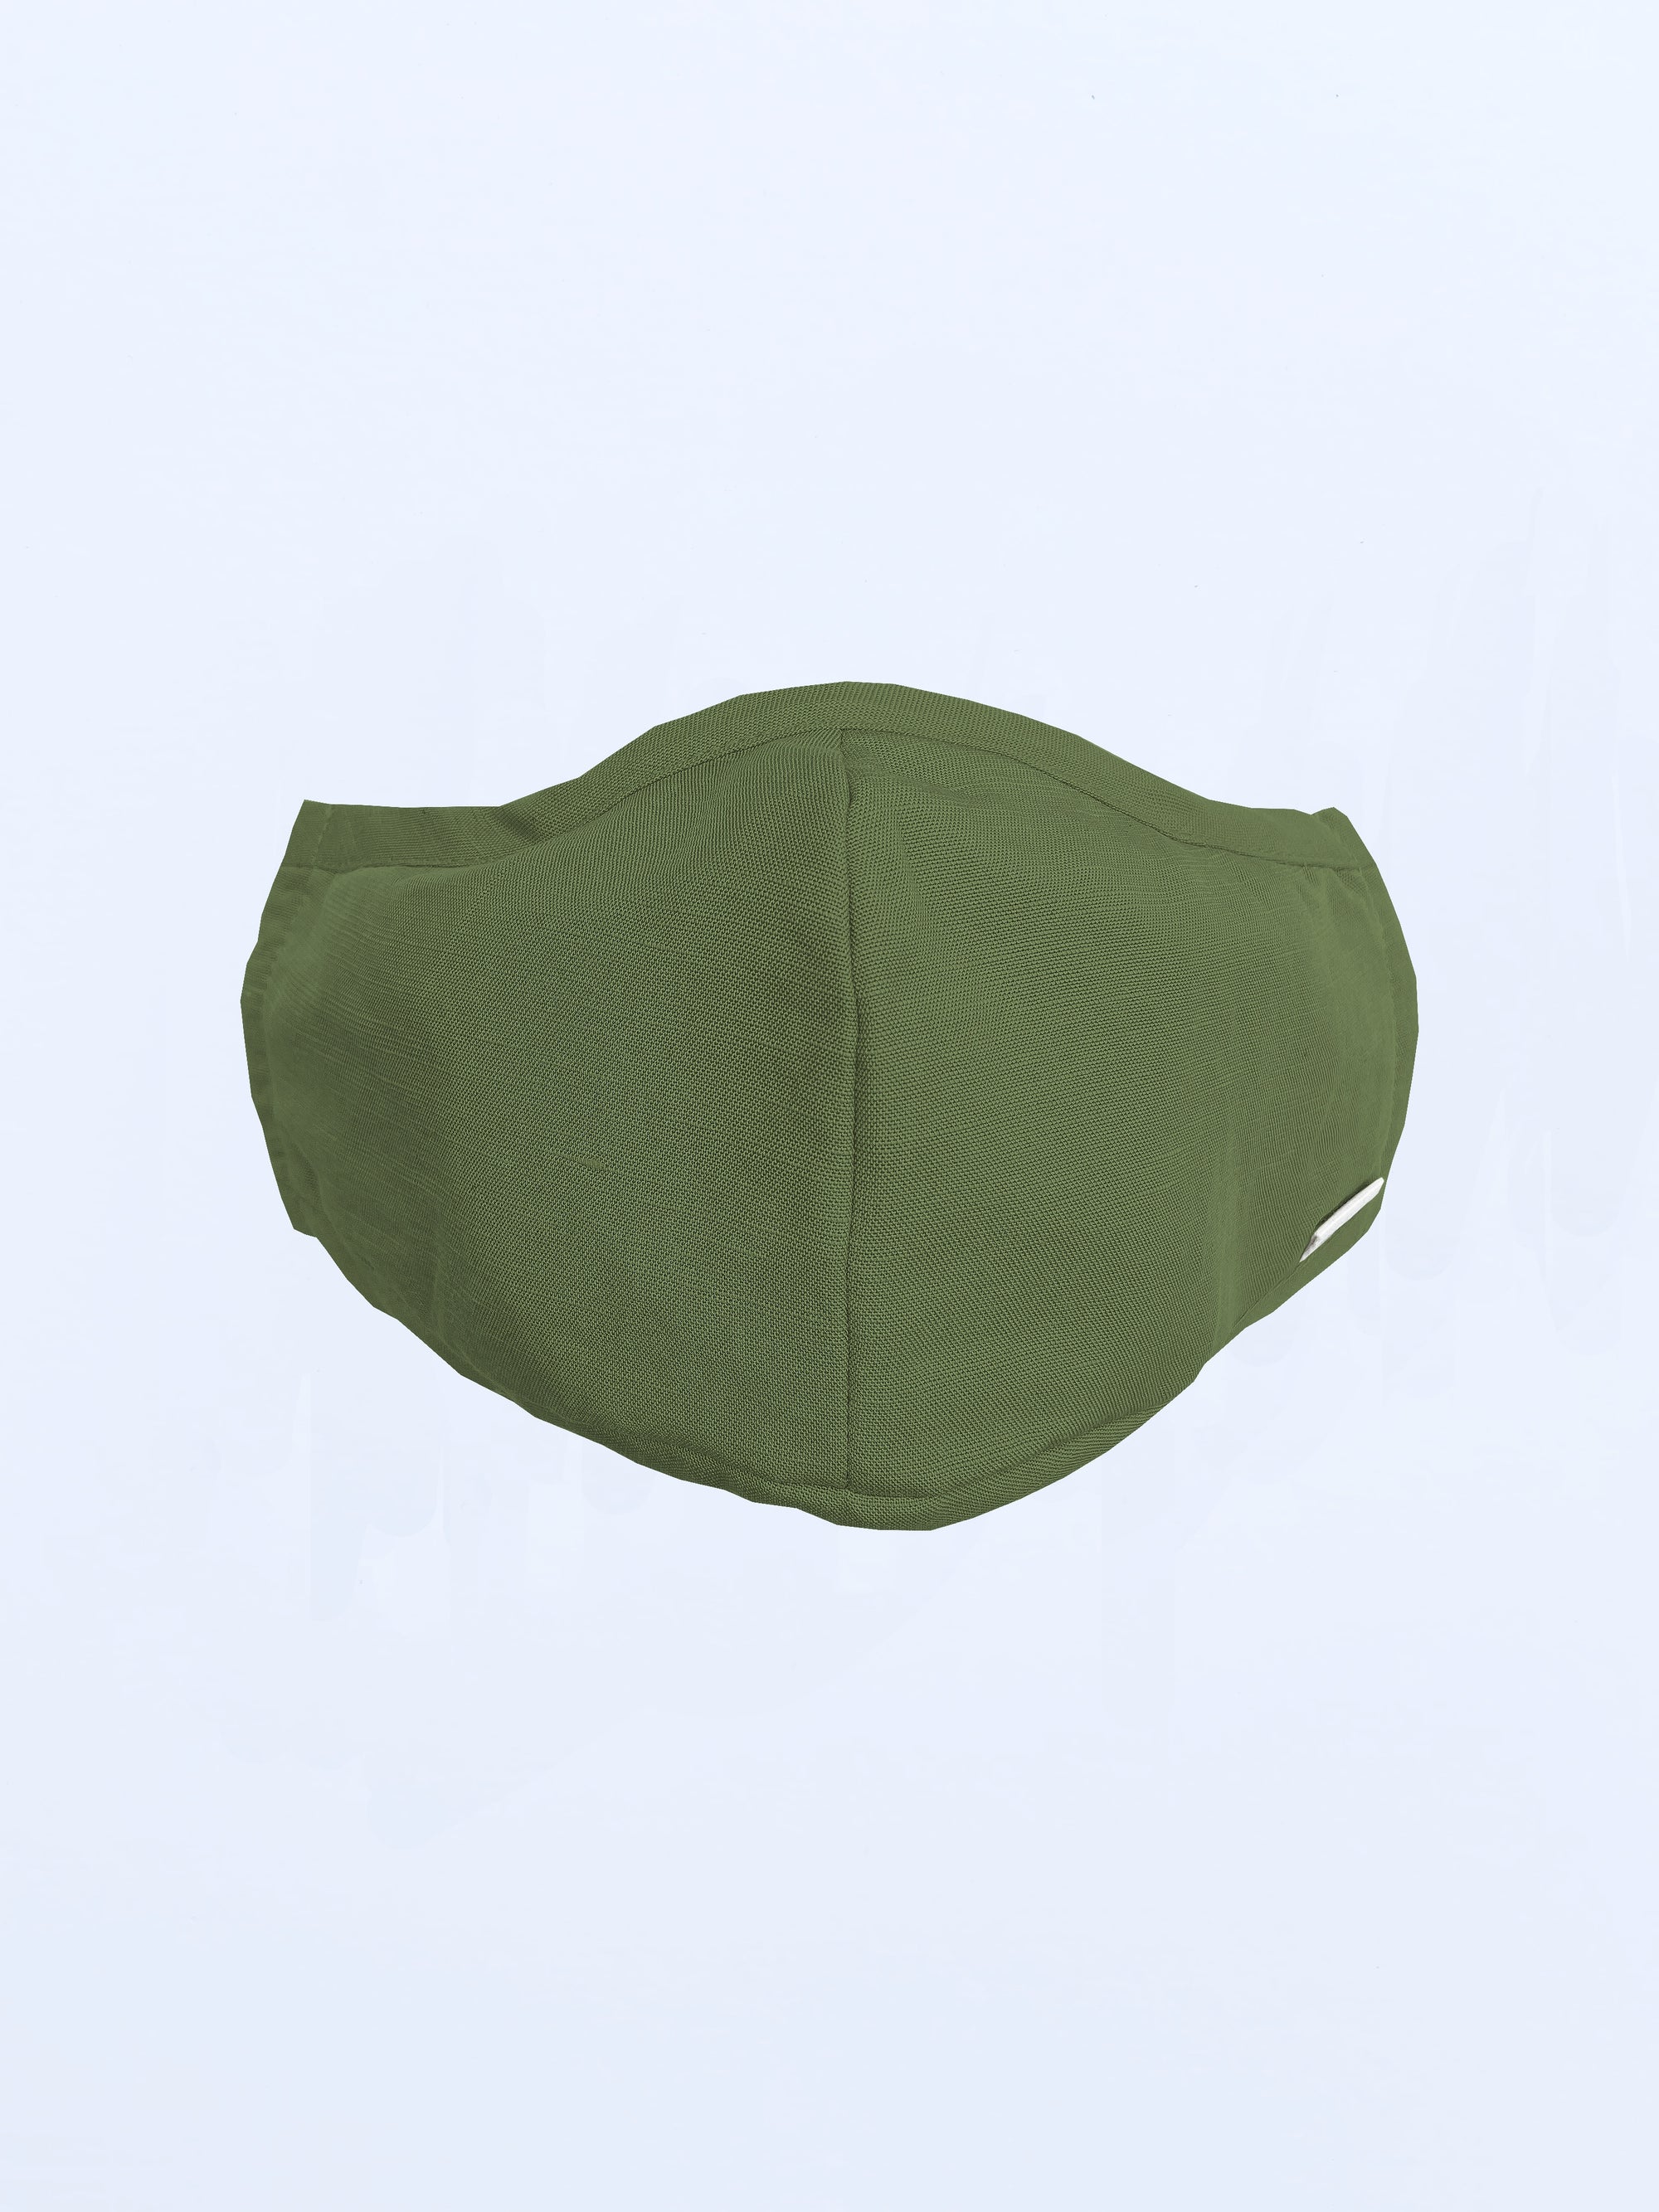 Face Mask - REUSABLE FABRIC FACE MASK - OLIVE